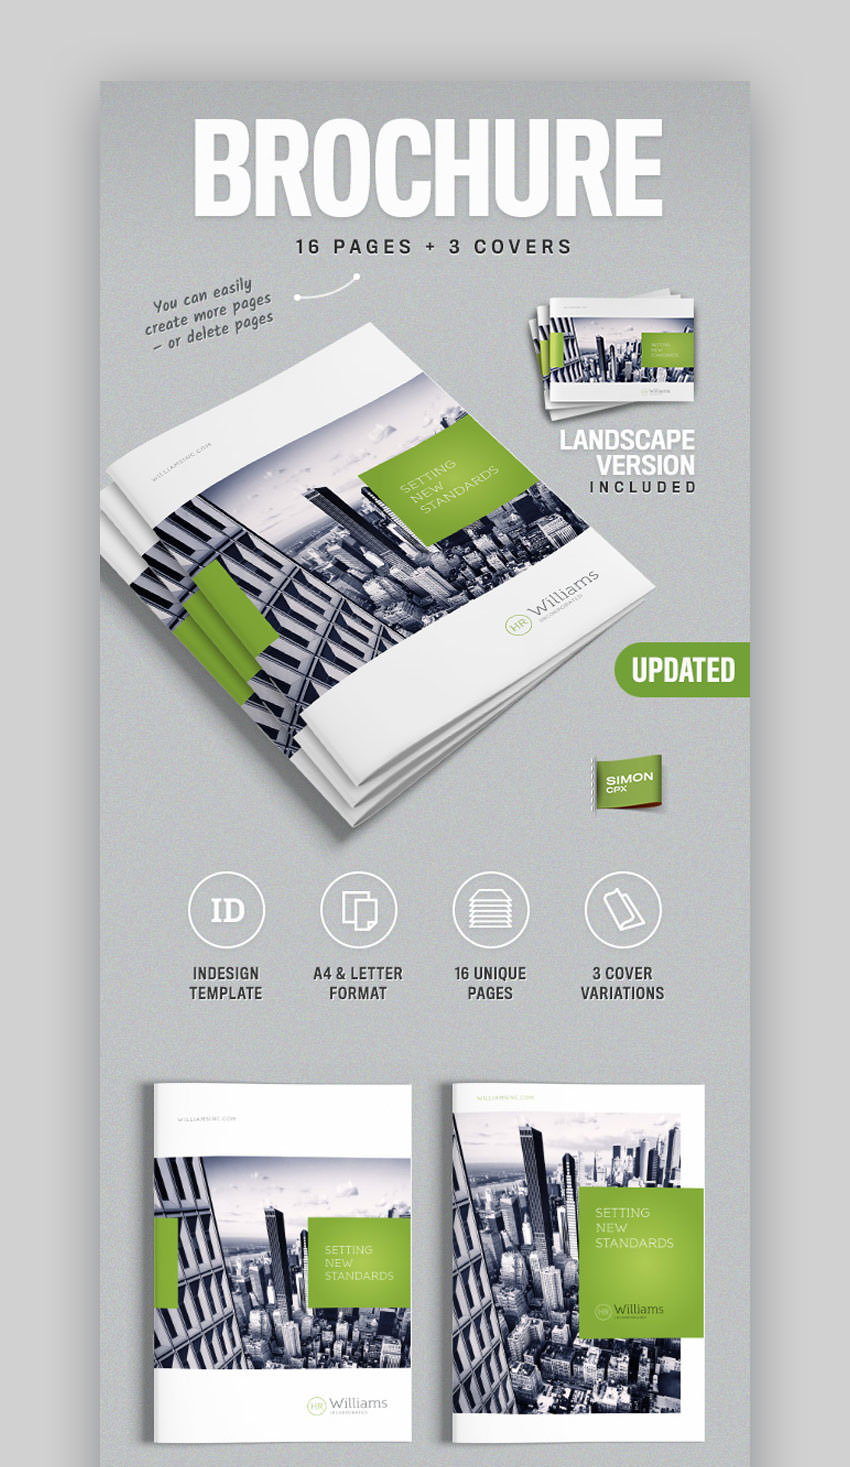 30 Best Indesign Brochure Templates - Creative Business Throughout Indesign Templates Free Download Brochure